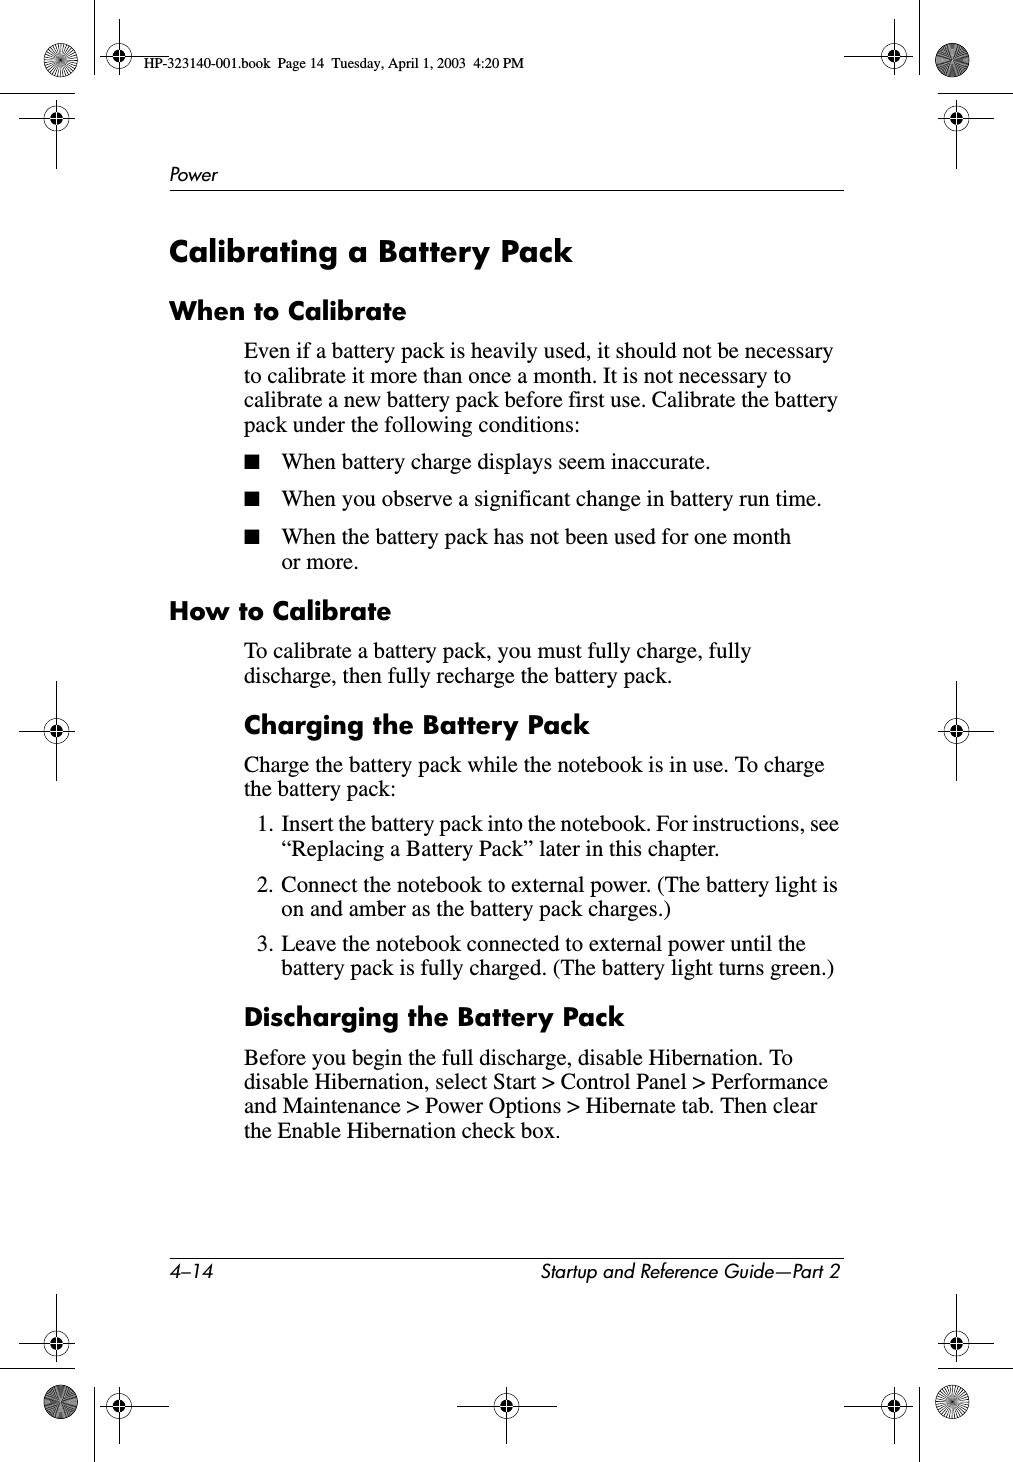 4–14 Startup and Reference Guide—Part 2PowerCalibrating a Battery PackWhen to CalibrateEven if a battery pack is heavily used, it should not be necessary to calibrate it more than once a month. It is not necessary to calibrate a new battery pack before first use. Calibrate the battery pack under the following conditions:■When battery charge displays seem inaccurate.■When you observe a significant change in battery run time.■When the battery pack has not been used for one month or more.How to CalibrateTo calibrate a battery pack, you must fully charge, fully discharge, then fully recharge the battery pack. Charging the Battery PackCharge the battery pack while the notebook is in use. To charge the battery pack:1. Insert the battery pack into the notebook. For instructions, see “Replacing a Battery Pack” later in this chapter.2. Connect the notebook to external power. (The battery light is on and amber as the battery pack charges.) 3. Leave the notebook connected to external power until the battery pack is fully charged. (The battery light turns green.)Discharging the Battery PackBefore you begin the full discharge, disable Hibernation. To disable Hibernation, select Start &gt; Control Panel &gt; Performance and Maintenance &gt; Power Options &gt; Hibernate tab. Then clear the Enable Hibernation check box.HP-323140-001.book  Page 14  Tuesday, April 1, 2003  4:20 PM